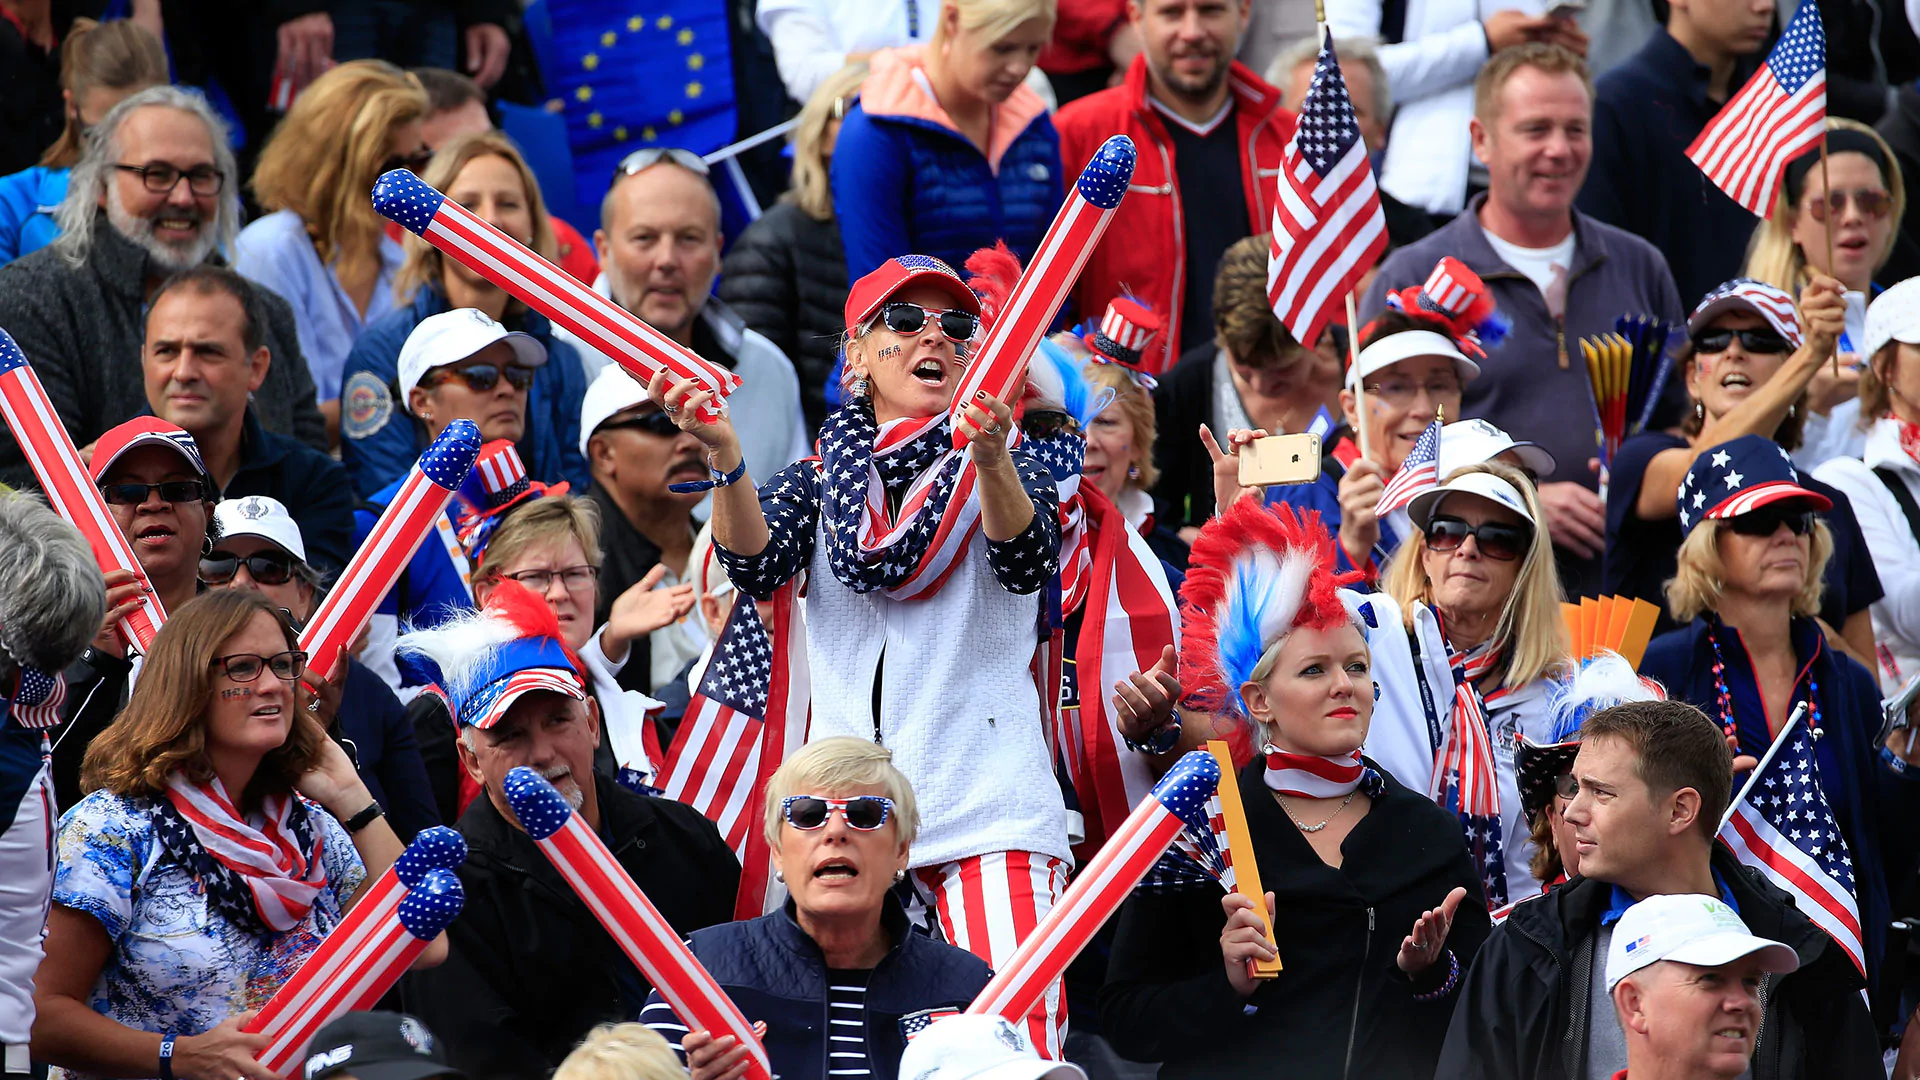 LPGA expects record crowds for Solheim Cup